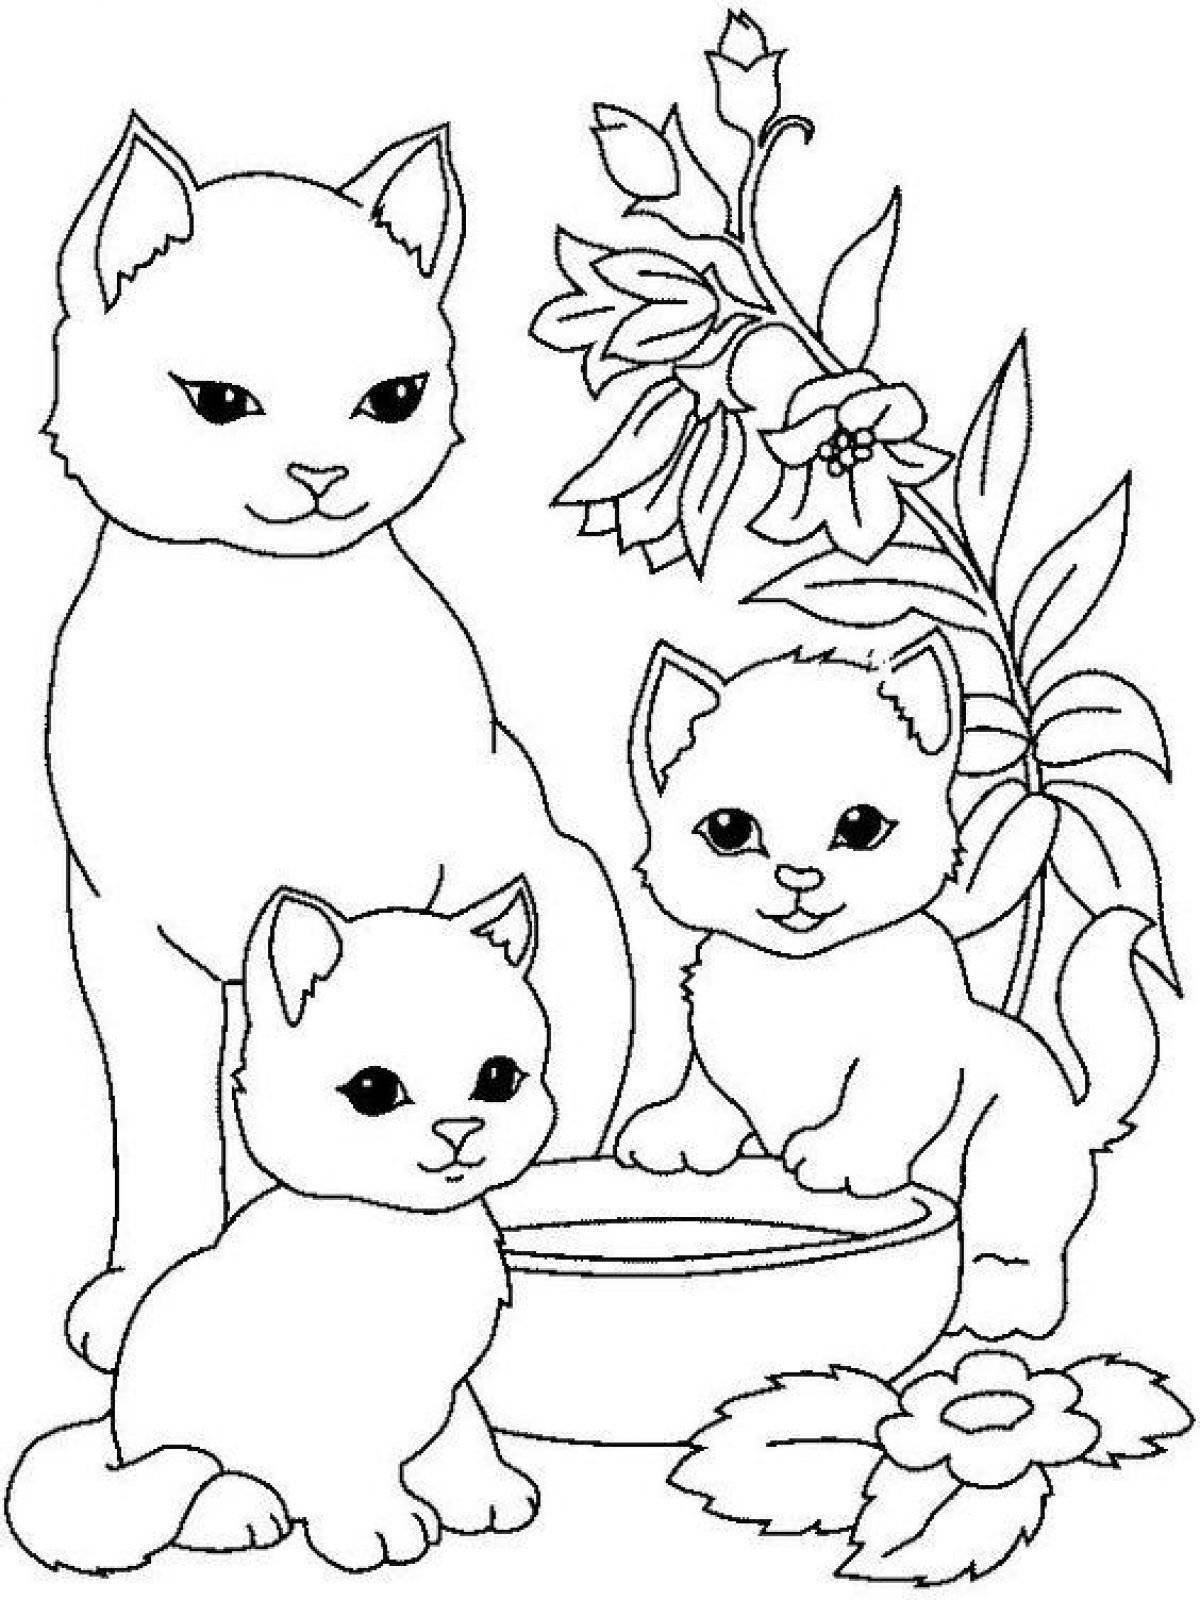 Adorable kote coloring book for kids